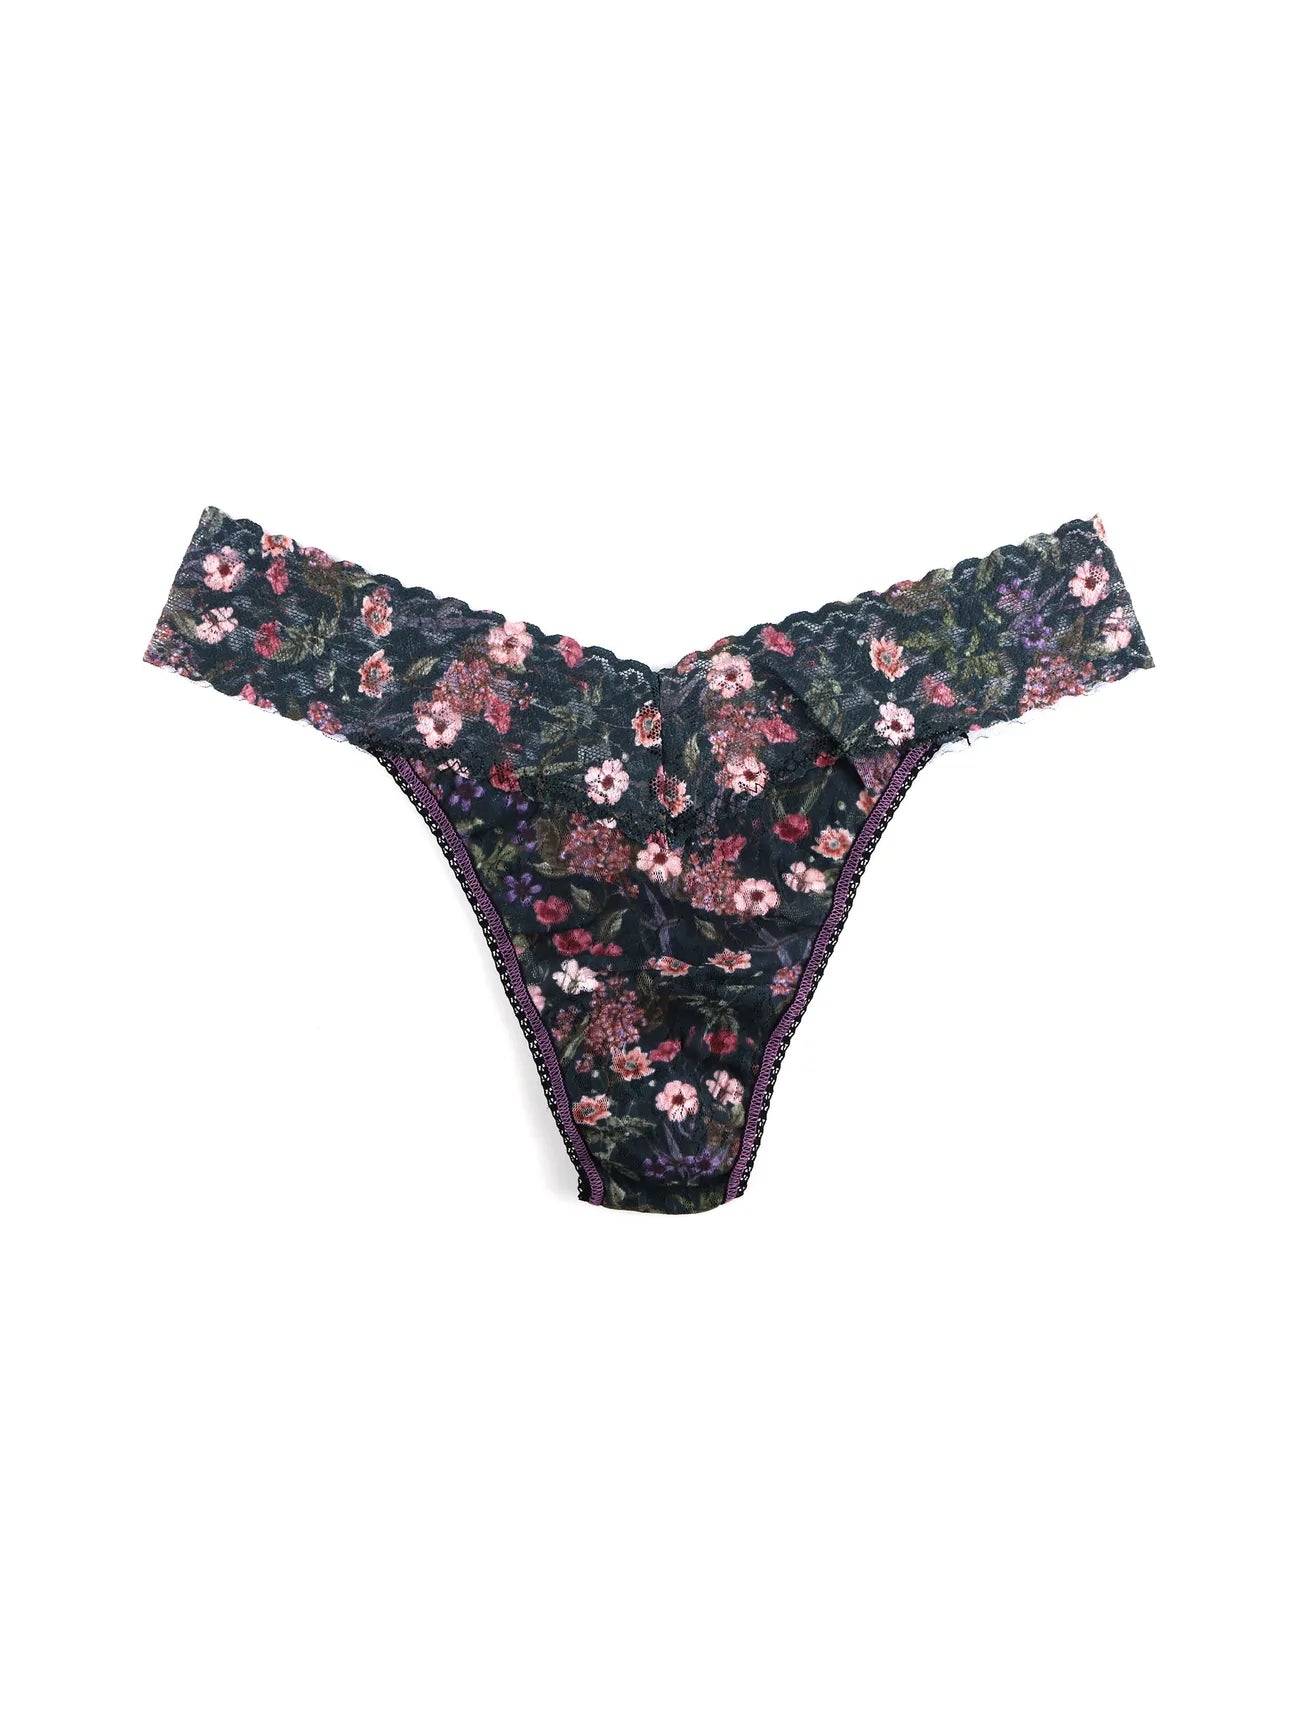 https://www.distinctivelyhers.com/cdn/shop/products/Hanky-Panky-Printed-Signature-Lace-Original-Rise-Thong-MYDDELTON-GARDENS-View-1_1300x_abef410d-4a4e-4804-abe8-2b6bf1701eb0_1300x1733.webp?v=1659565547